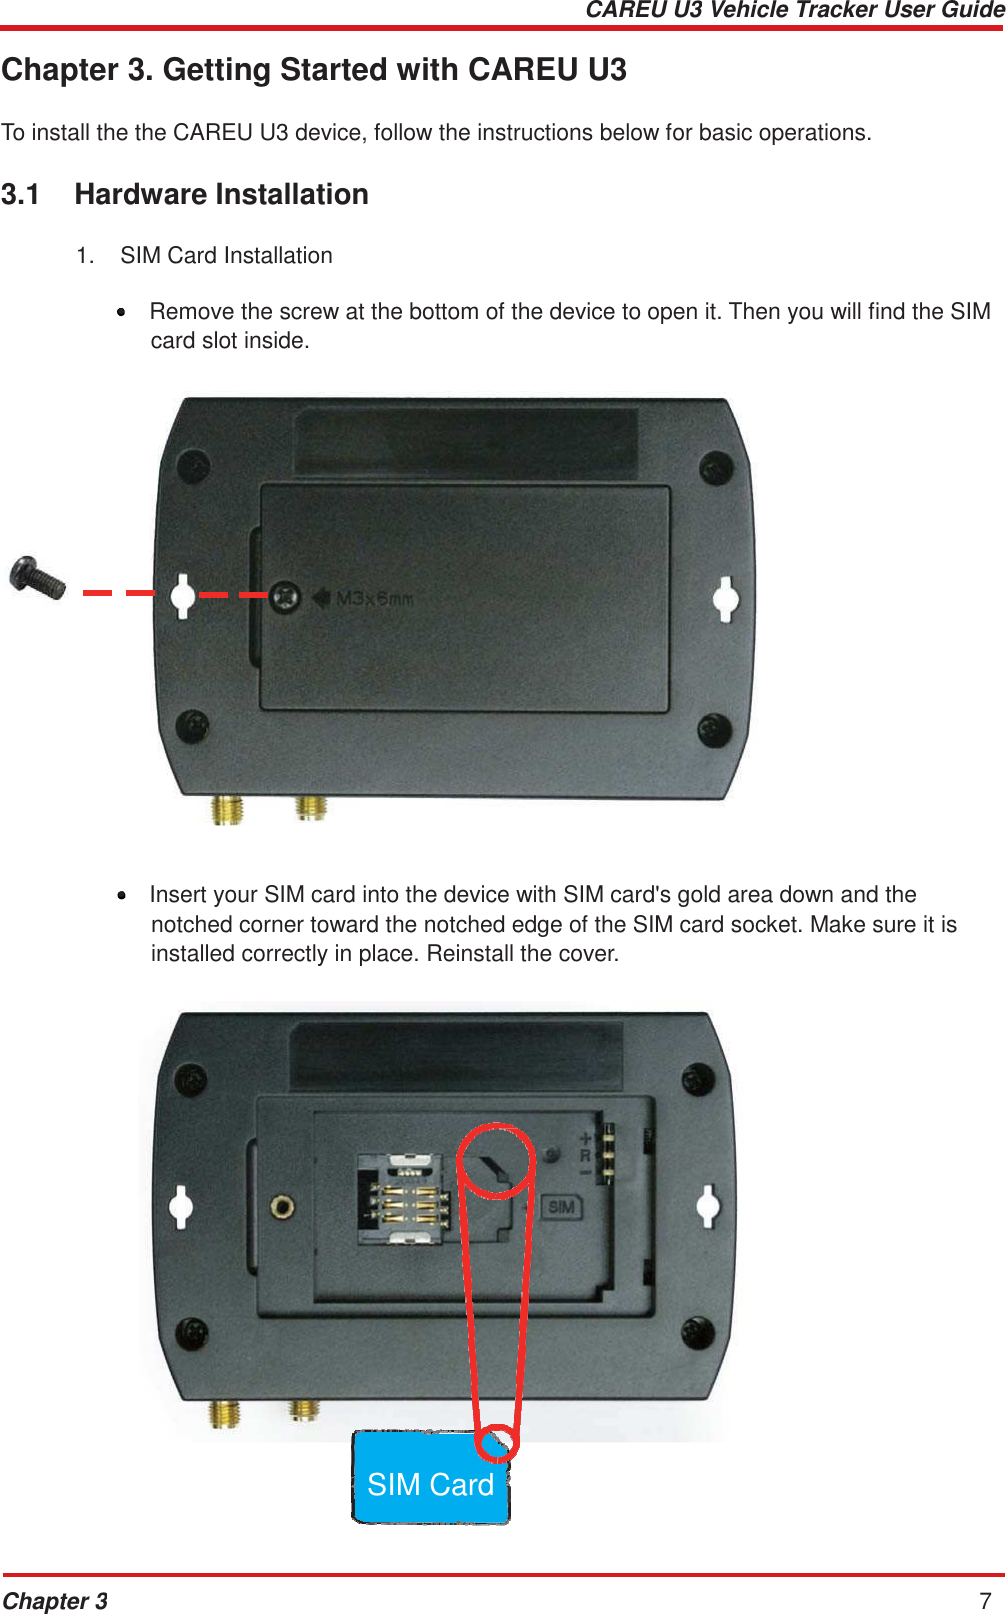 CAREU U3 Vehicle Tracker User Guide Chapter 3 7        Chapter 3. Getting Started with CAREU U3   To install the the CAREU U3 device, follow the instructions below for basic operations.   3.1  Hardware Installation  1.  SIM Card Installation  •  Remove the screw at the bottom of the device to open it. Then you will find the SIM card slot inside.                        •  Insert your SIM card into the device with SIM card&apos;s gold area down and the notched corner toward the notched edge of the SIM card socket. Make sure it is installed correctly in place. Reinstall the cover.                         SIM Card 